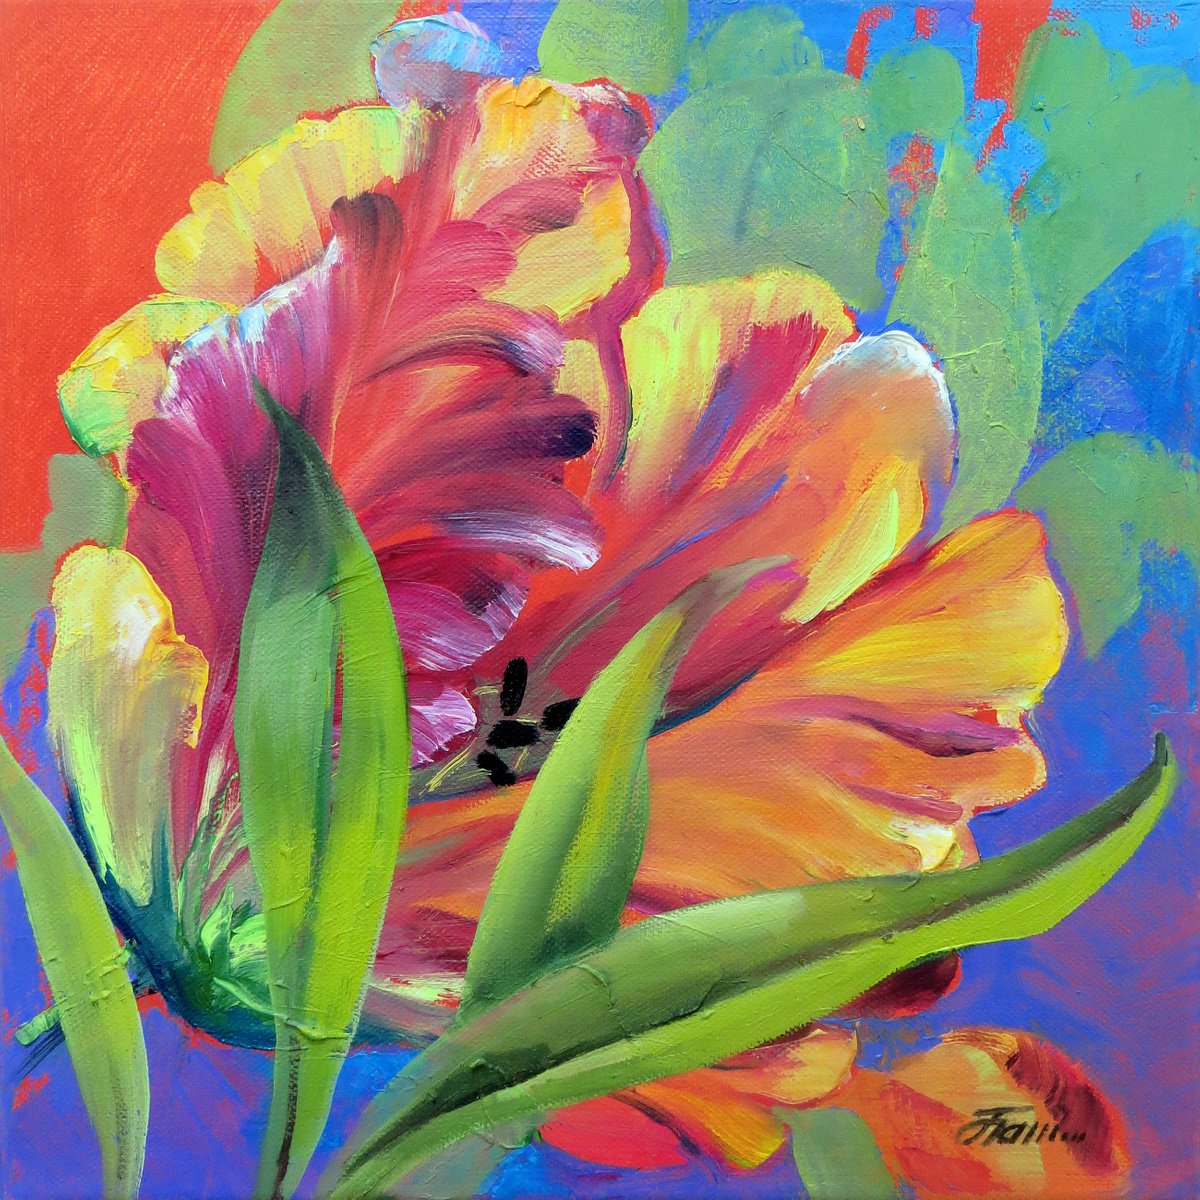 RED TULIPS, 40x40, oil on canvas by Olga Panina